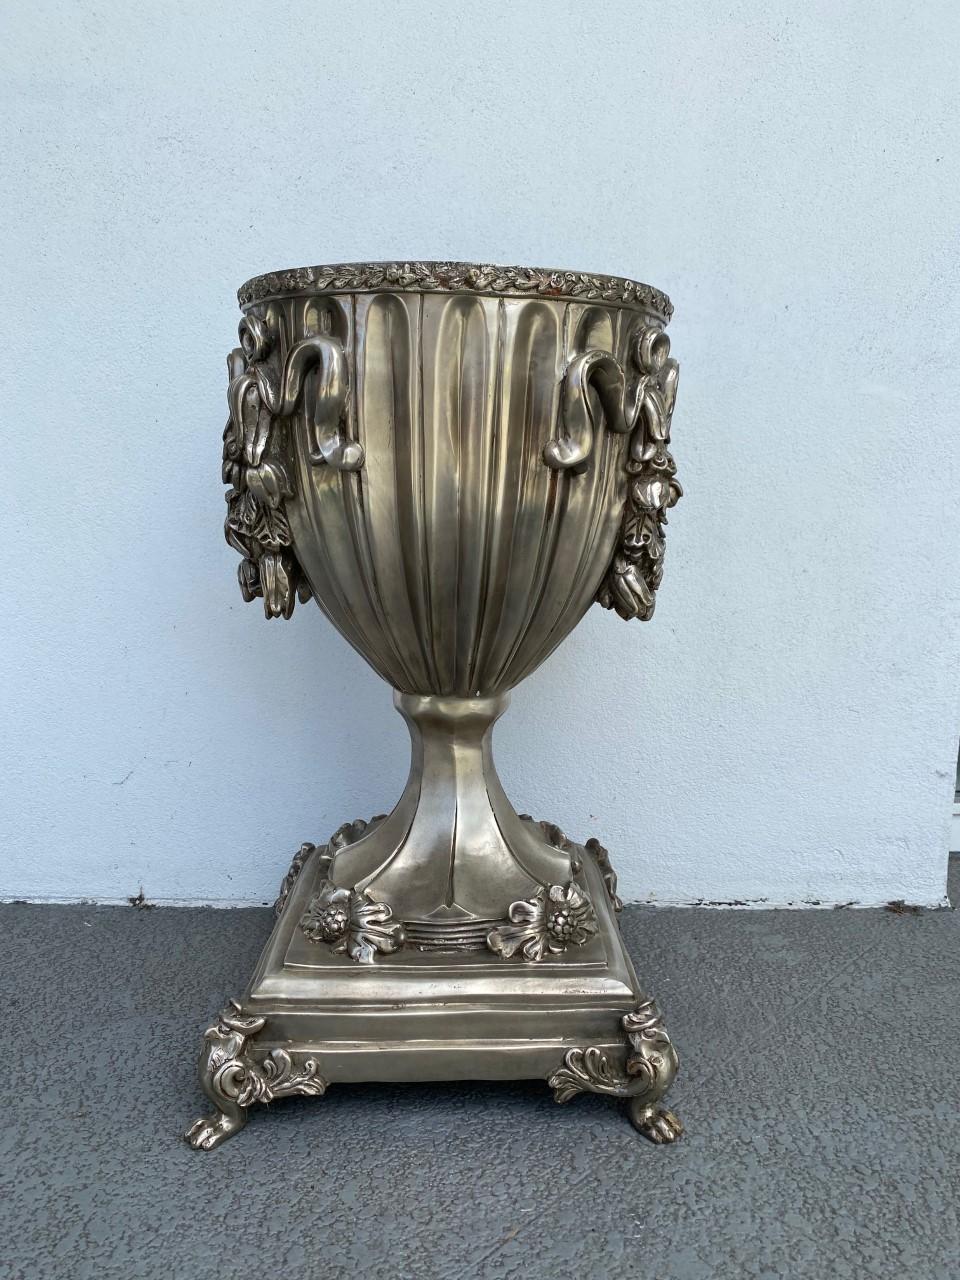 Beautifully classic, this luscious pair of silver dipped bronze urns bring an element of elegance. Each piece is full of meticulous detail. When looked up close, the silver dipped bronze details of ribbons, foliage, flowers and mythological animal